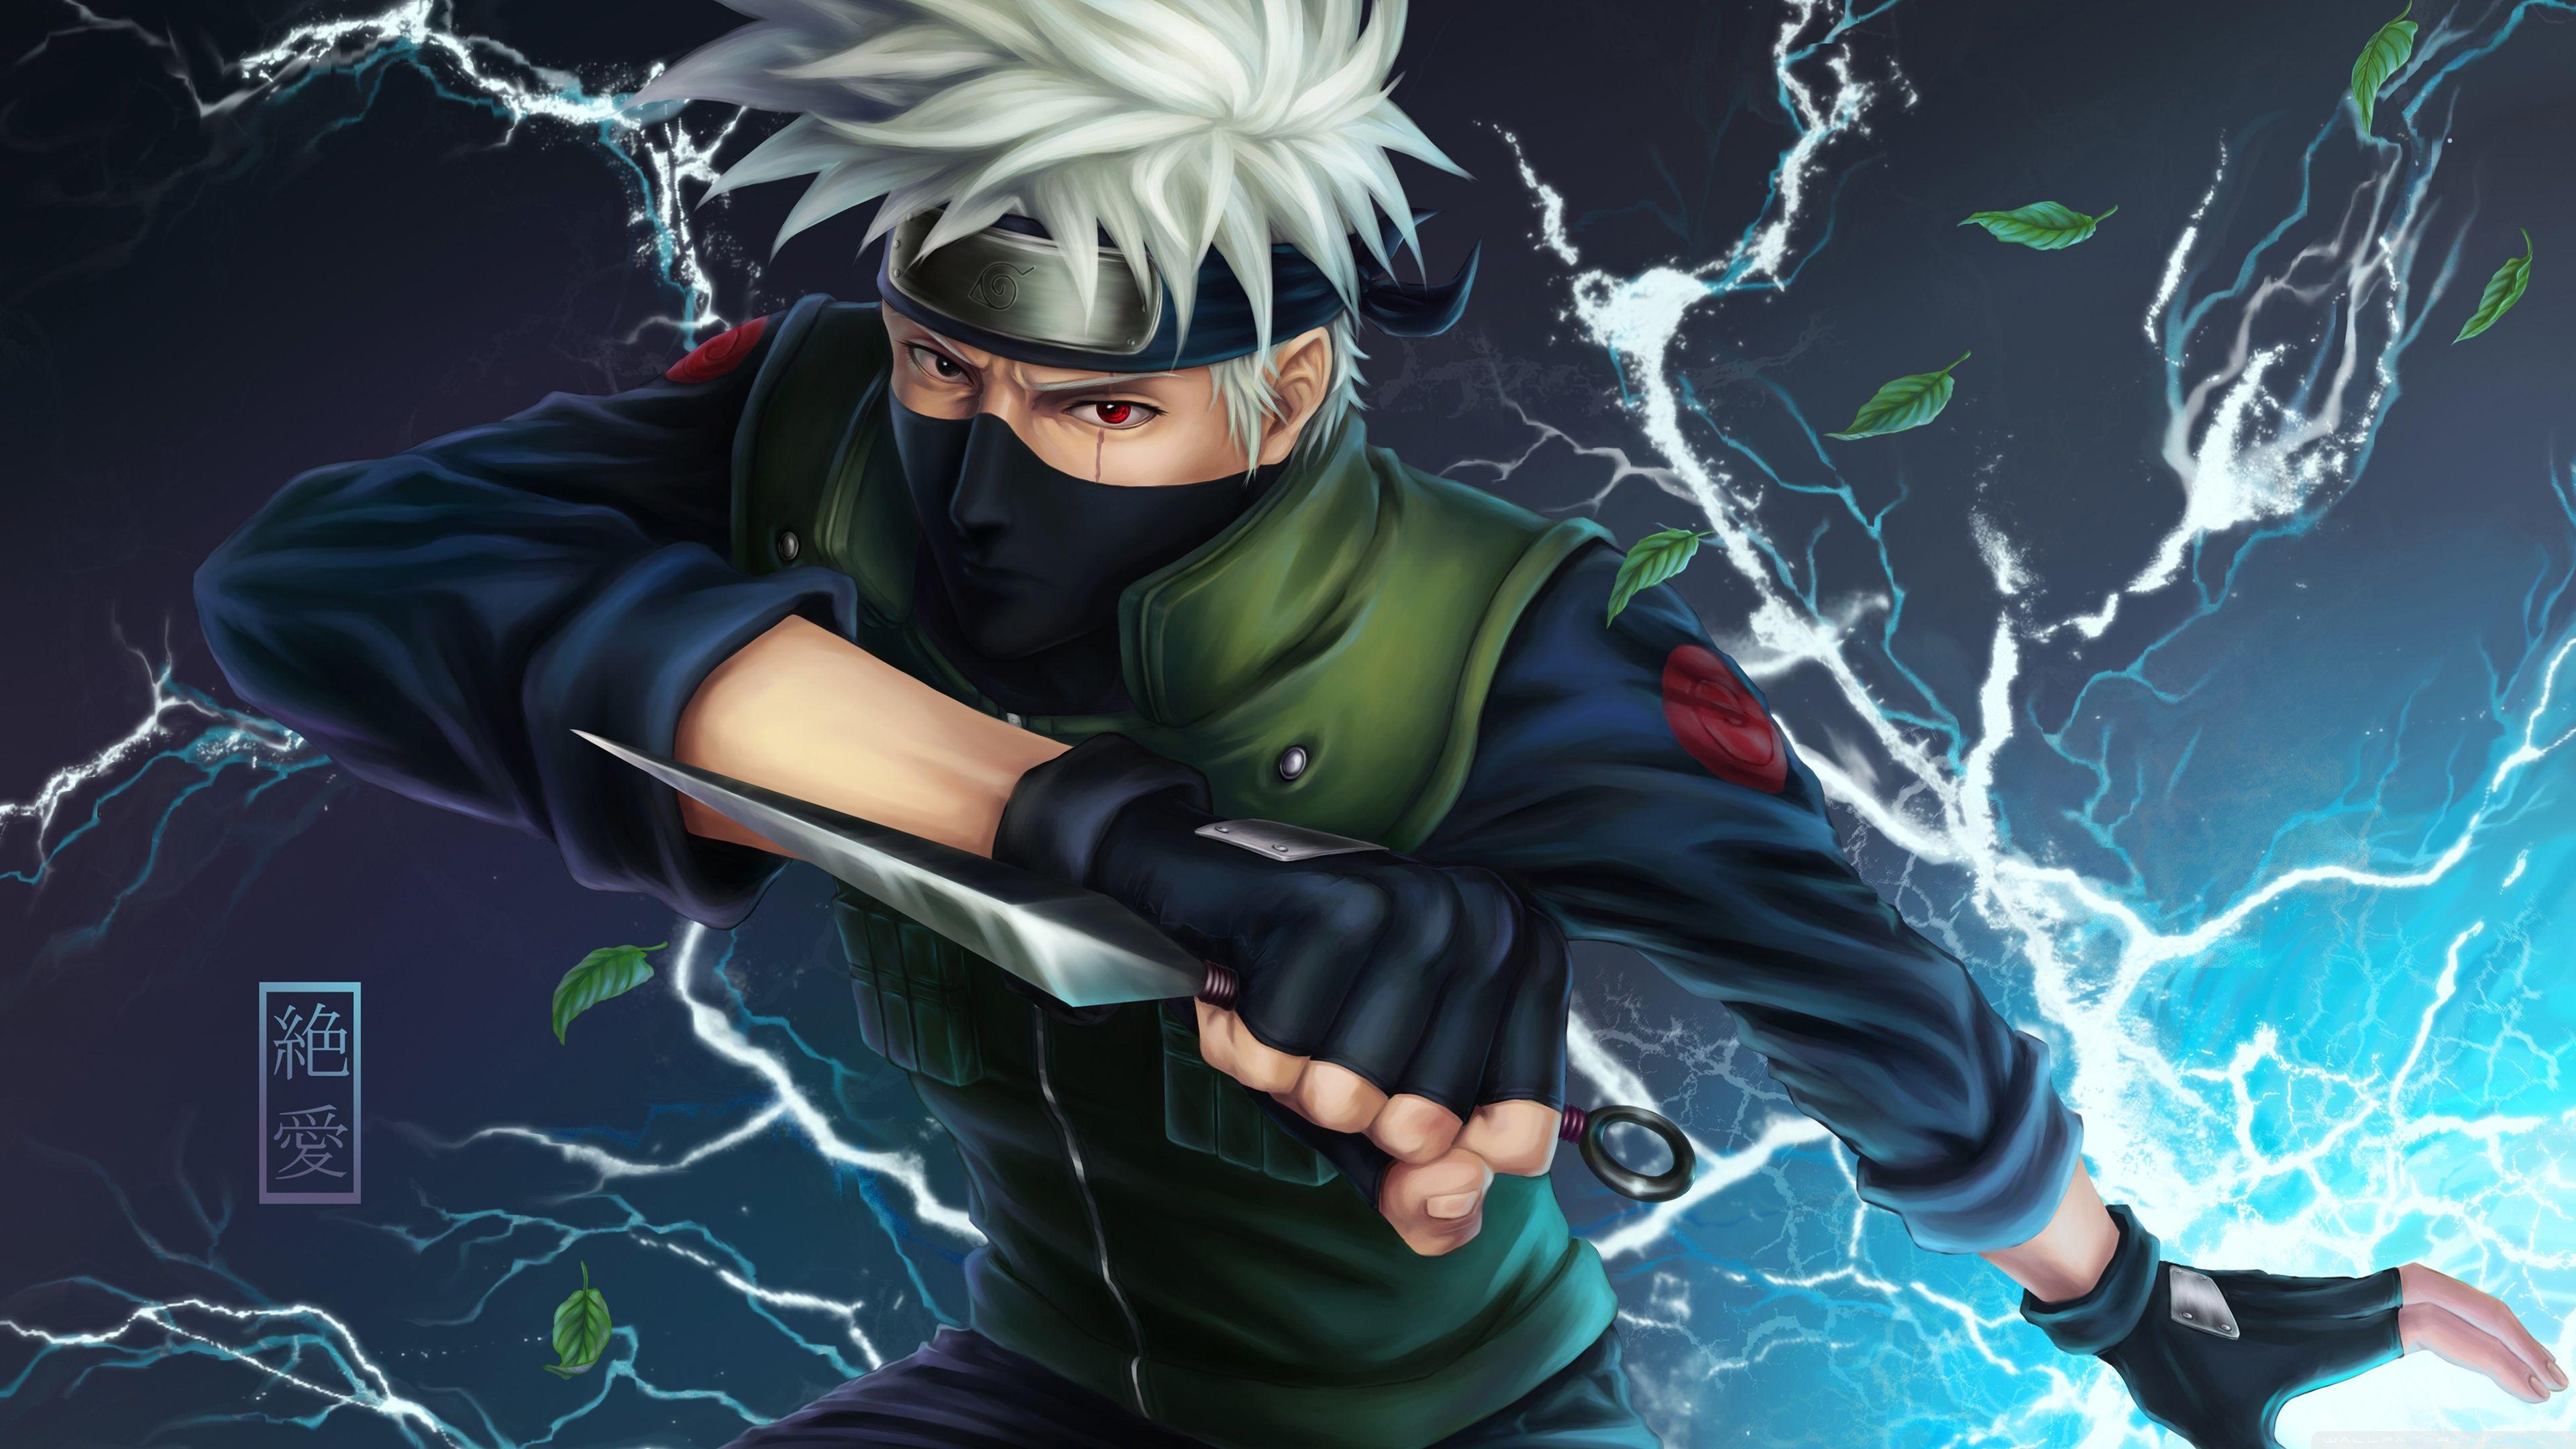 Epic Anime Naruto Hd Wallpapers Top Free Epic Anime Naruto Hd Backgrounds Wallpaperaccess